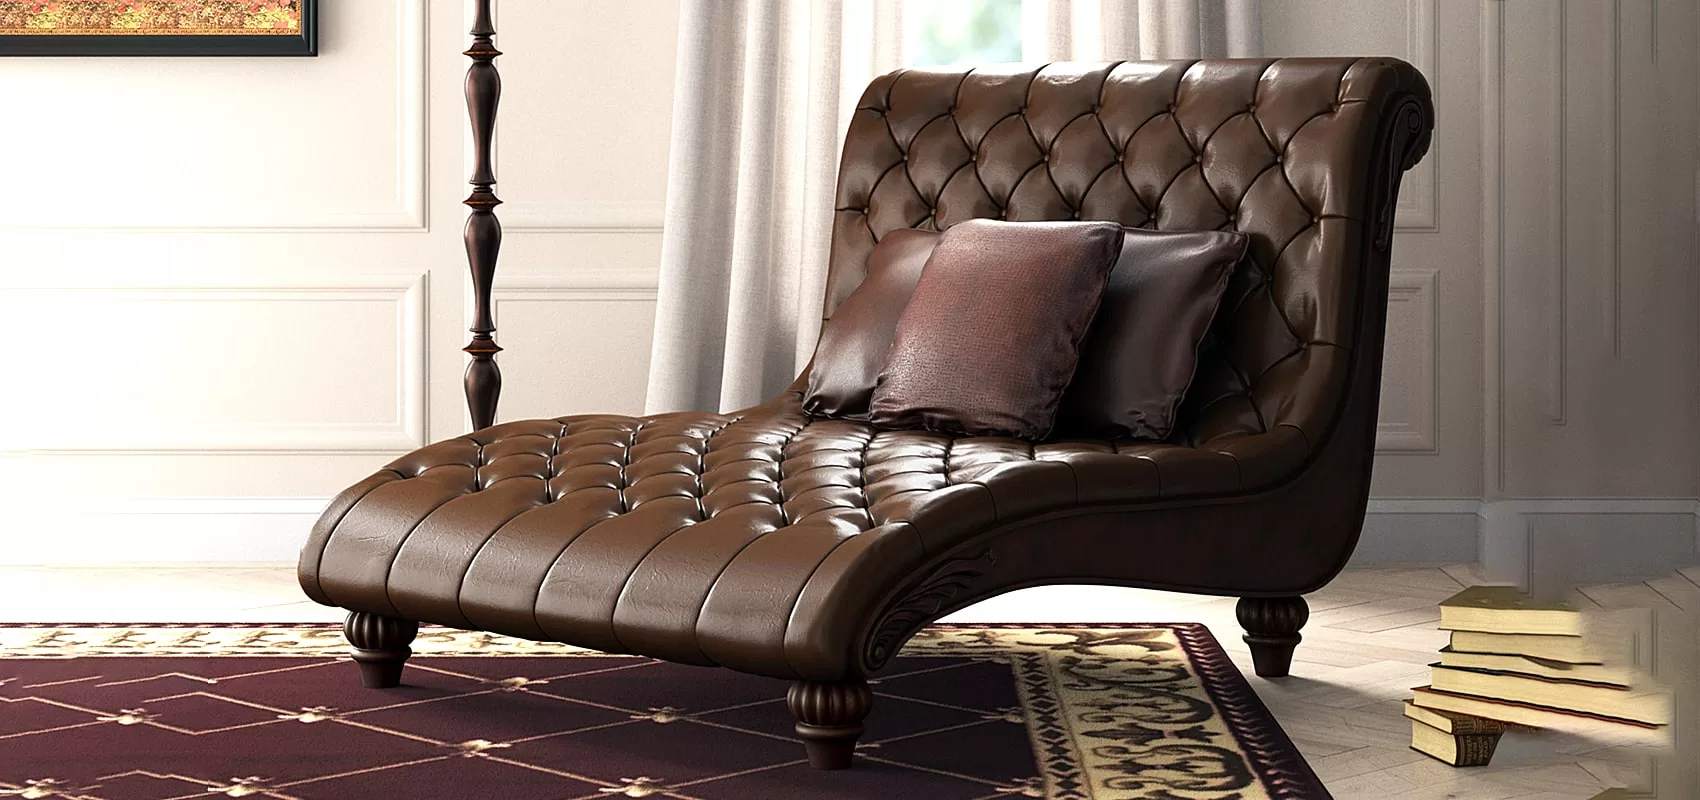 Double Chaise Lounge